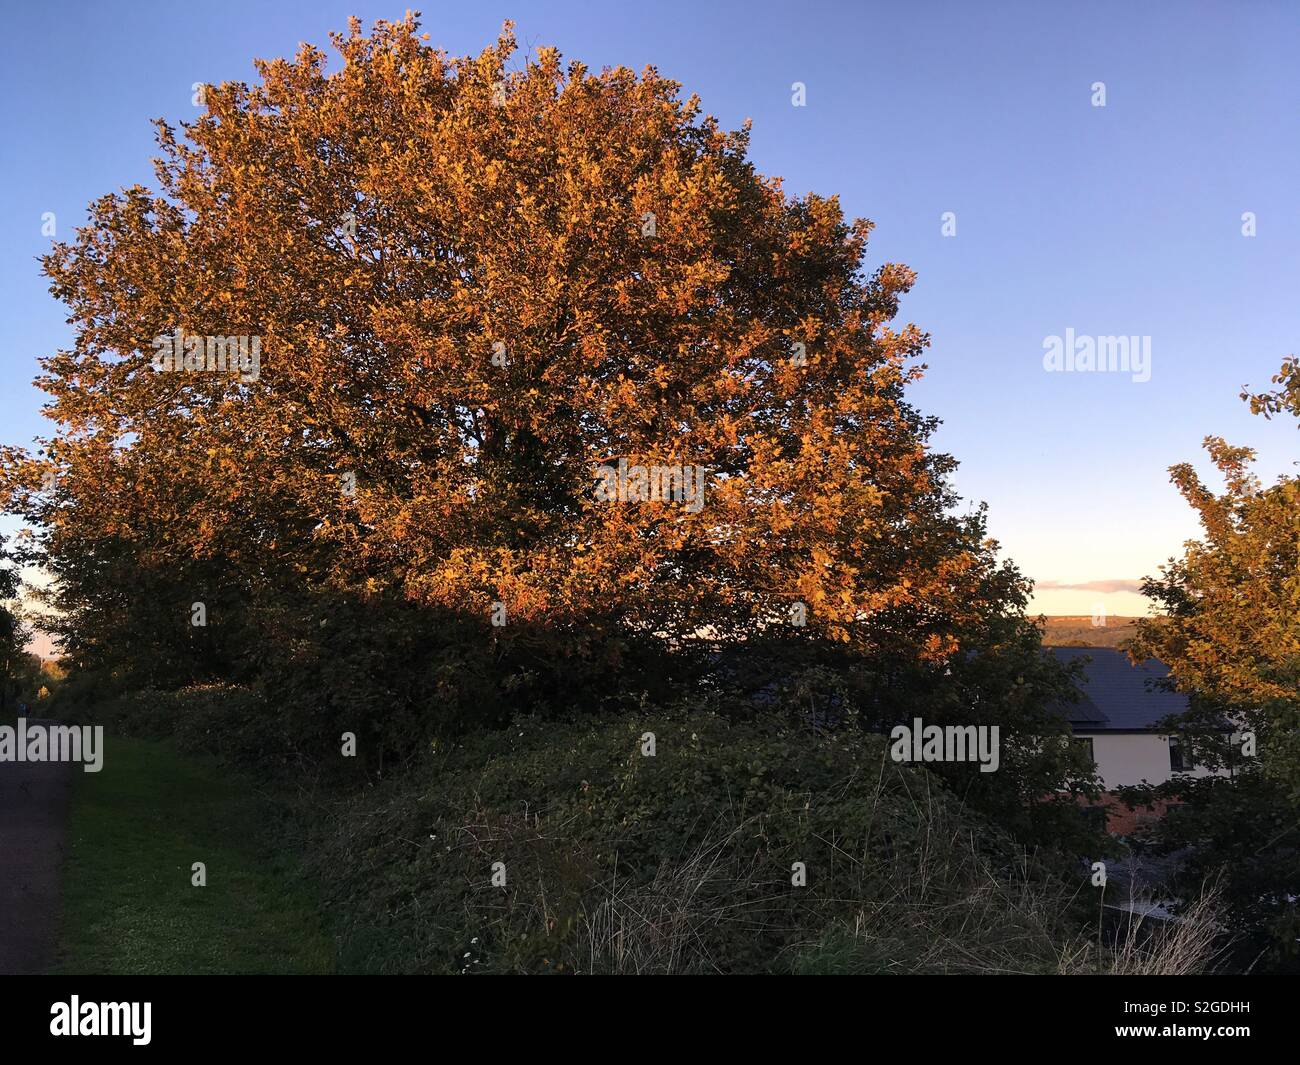 A beautiful strong and grounded tree under the sunshine in autumn shaped up like a crystal skull! Stock Photo